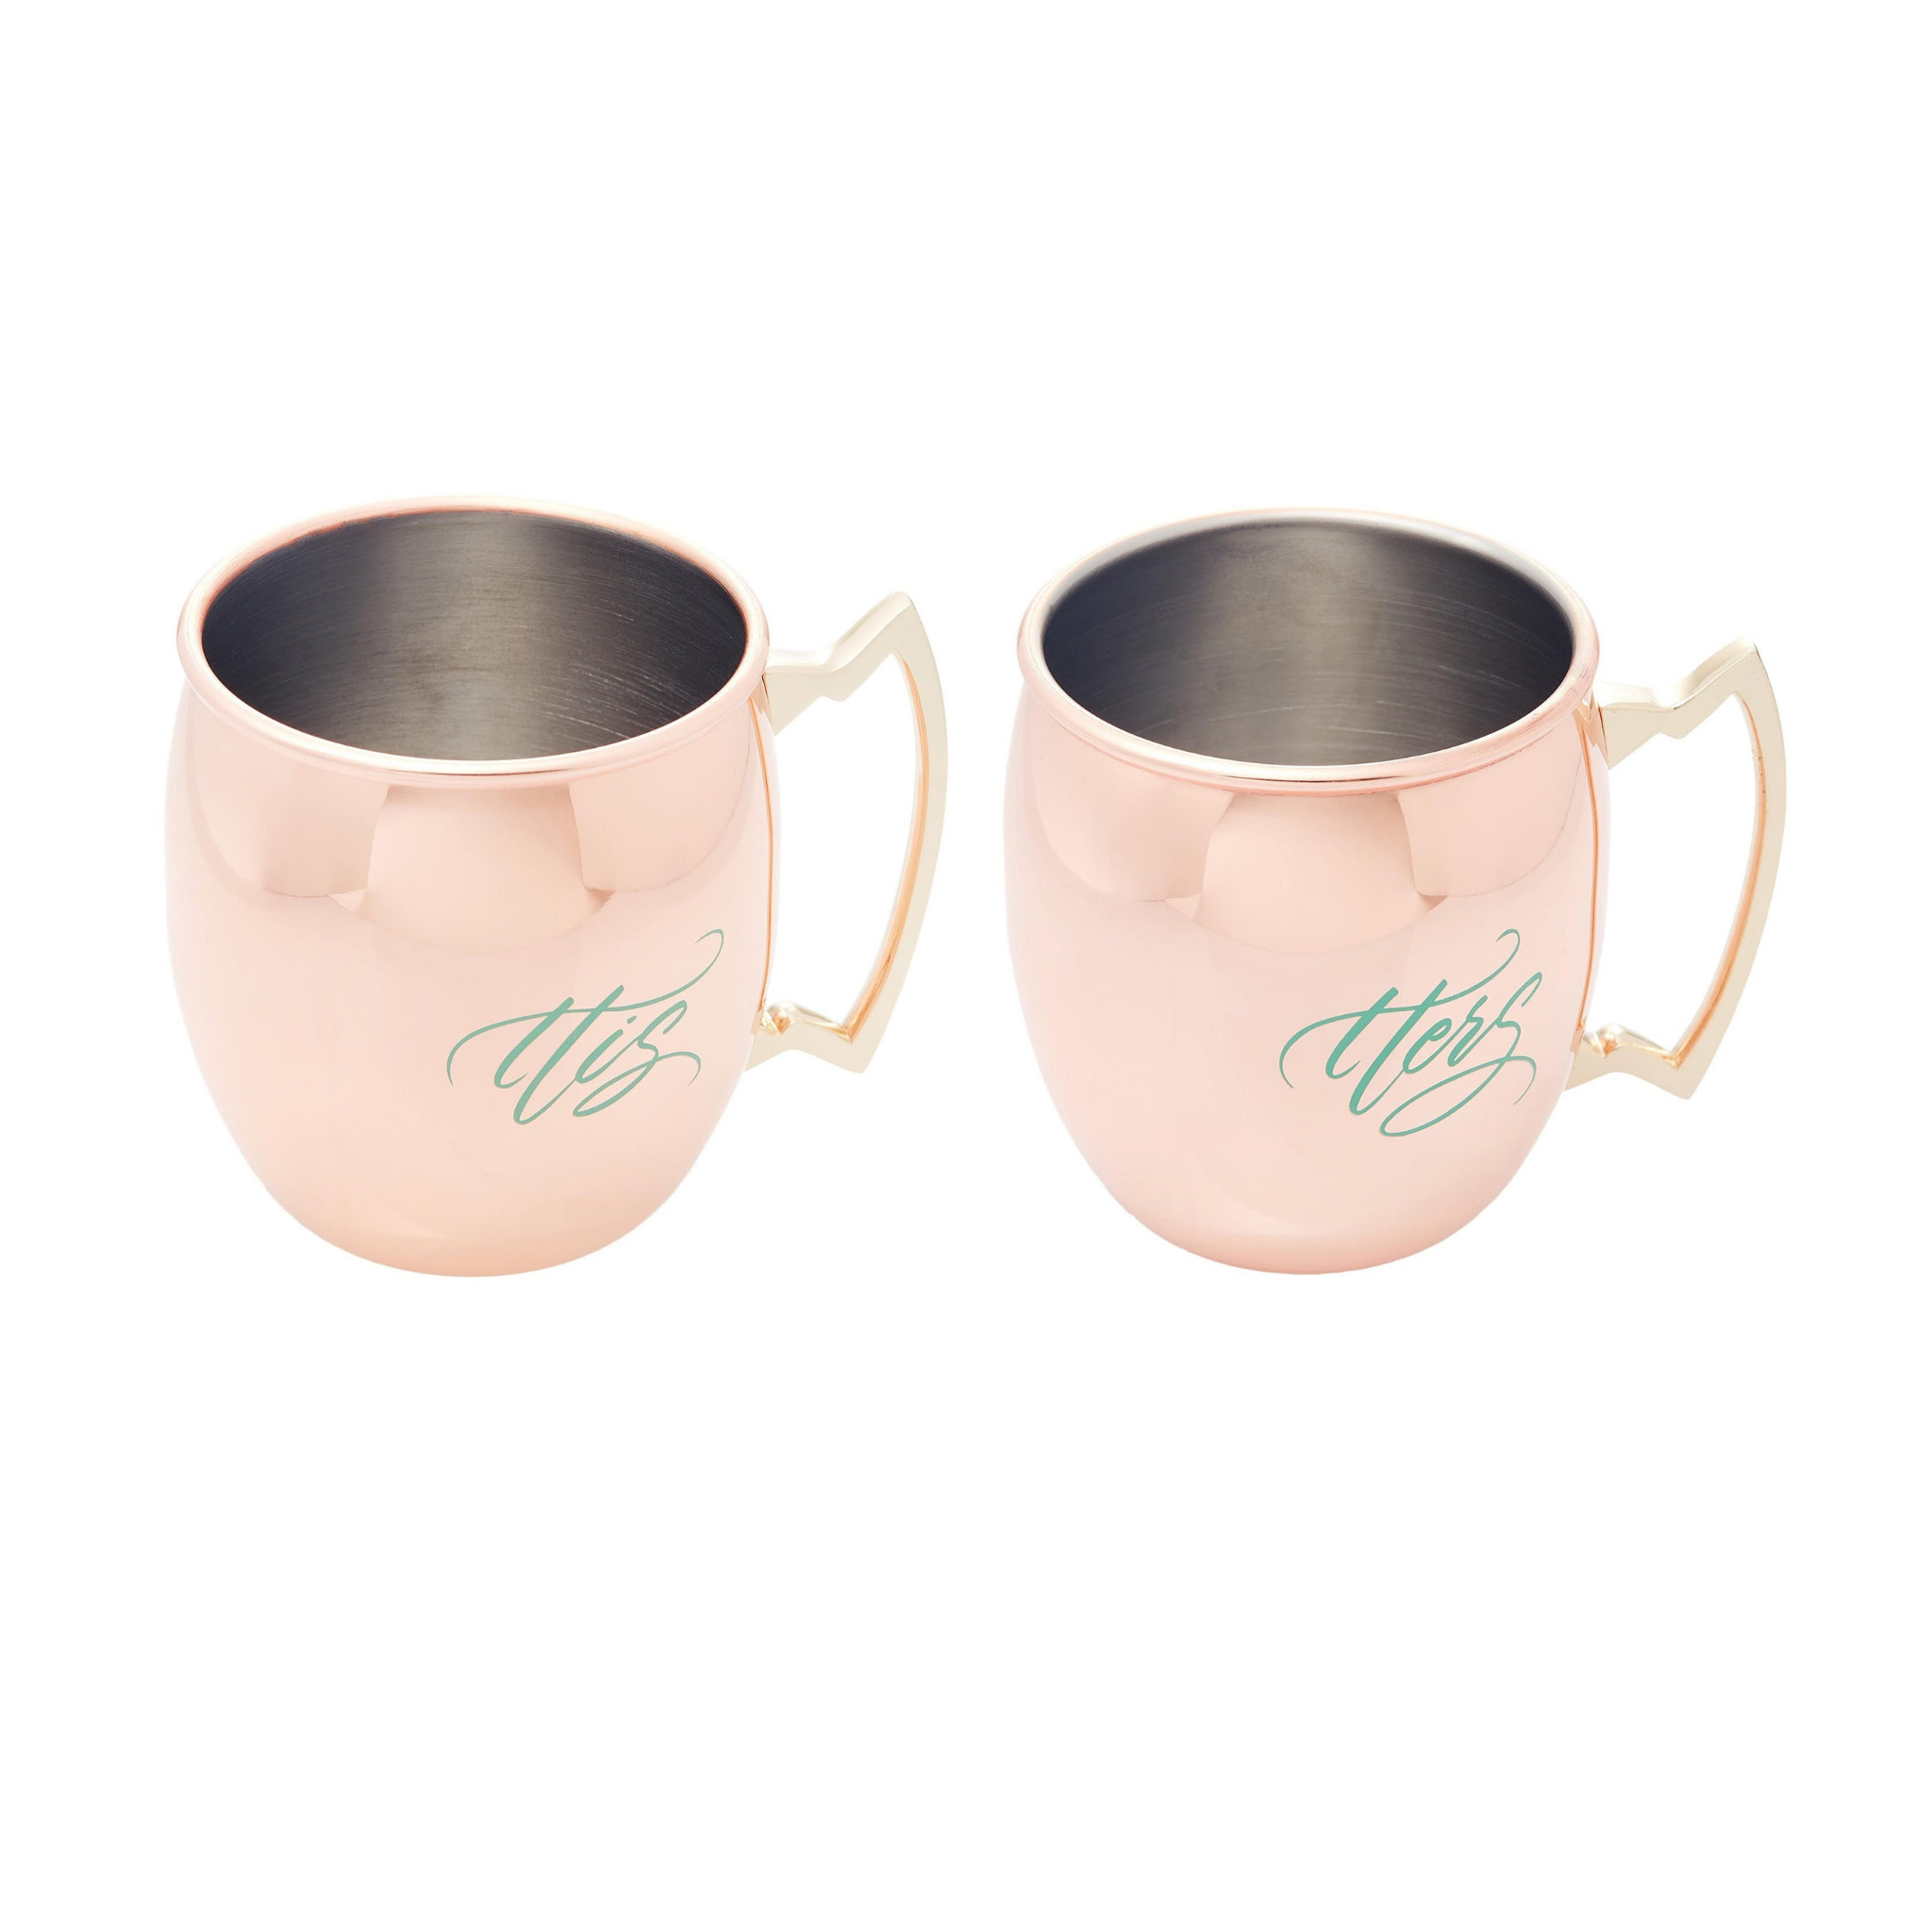 Stitches and Tweed - His Hers Copper Mug Set